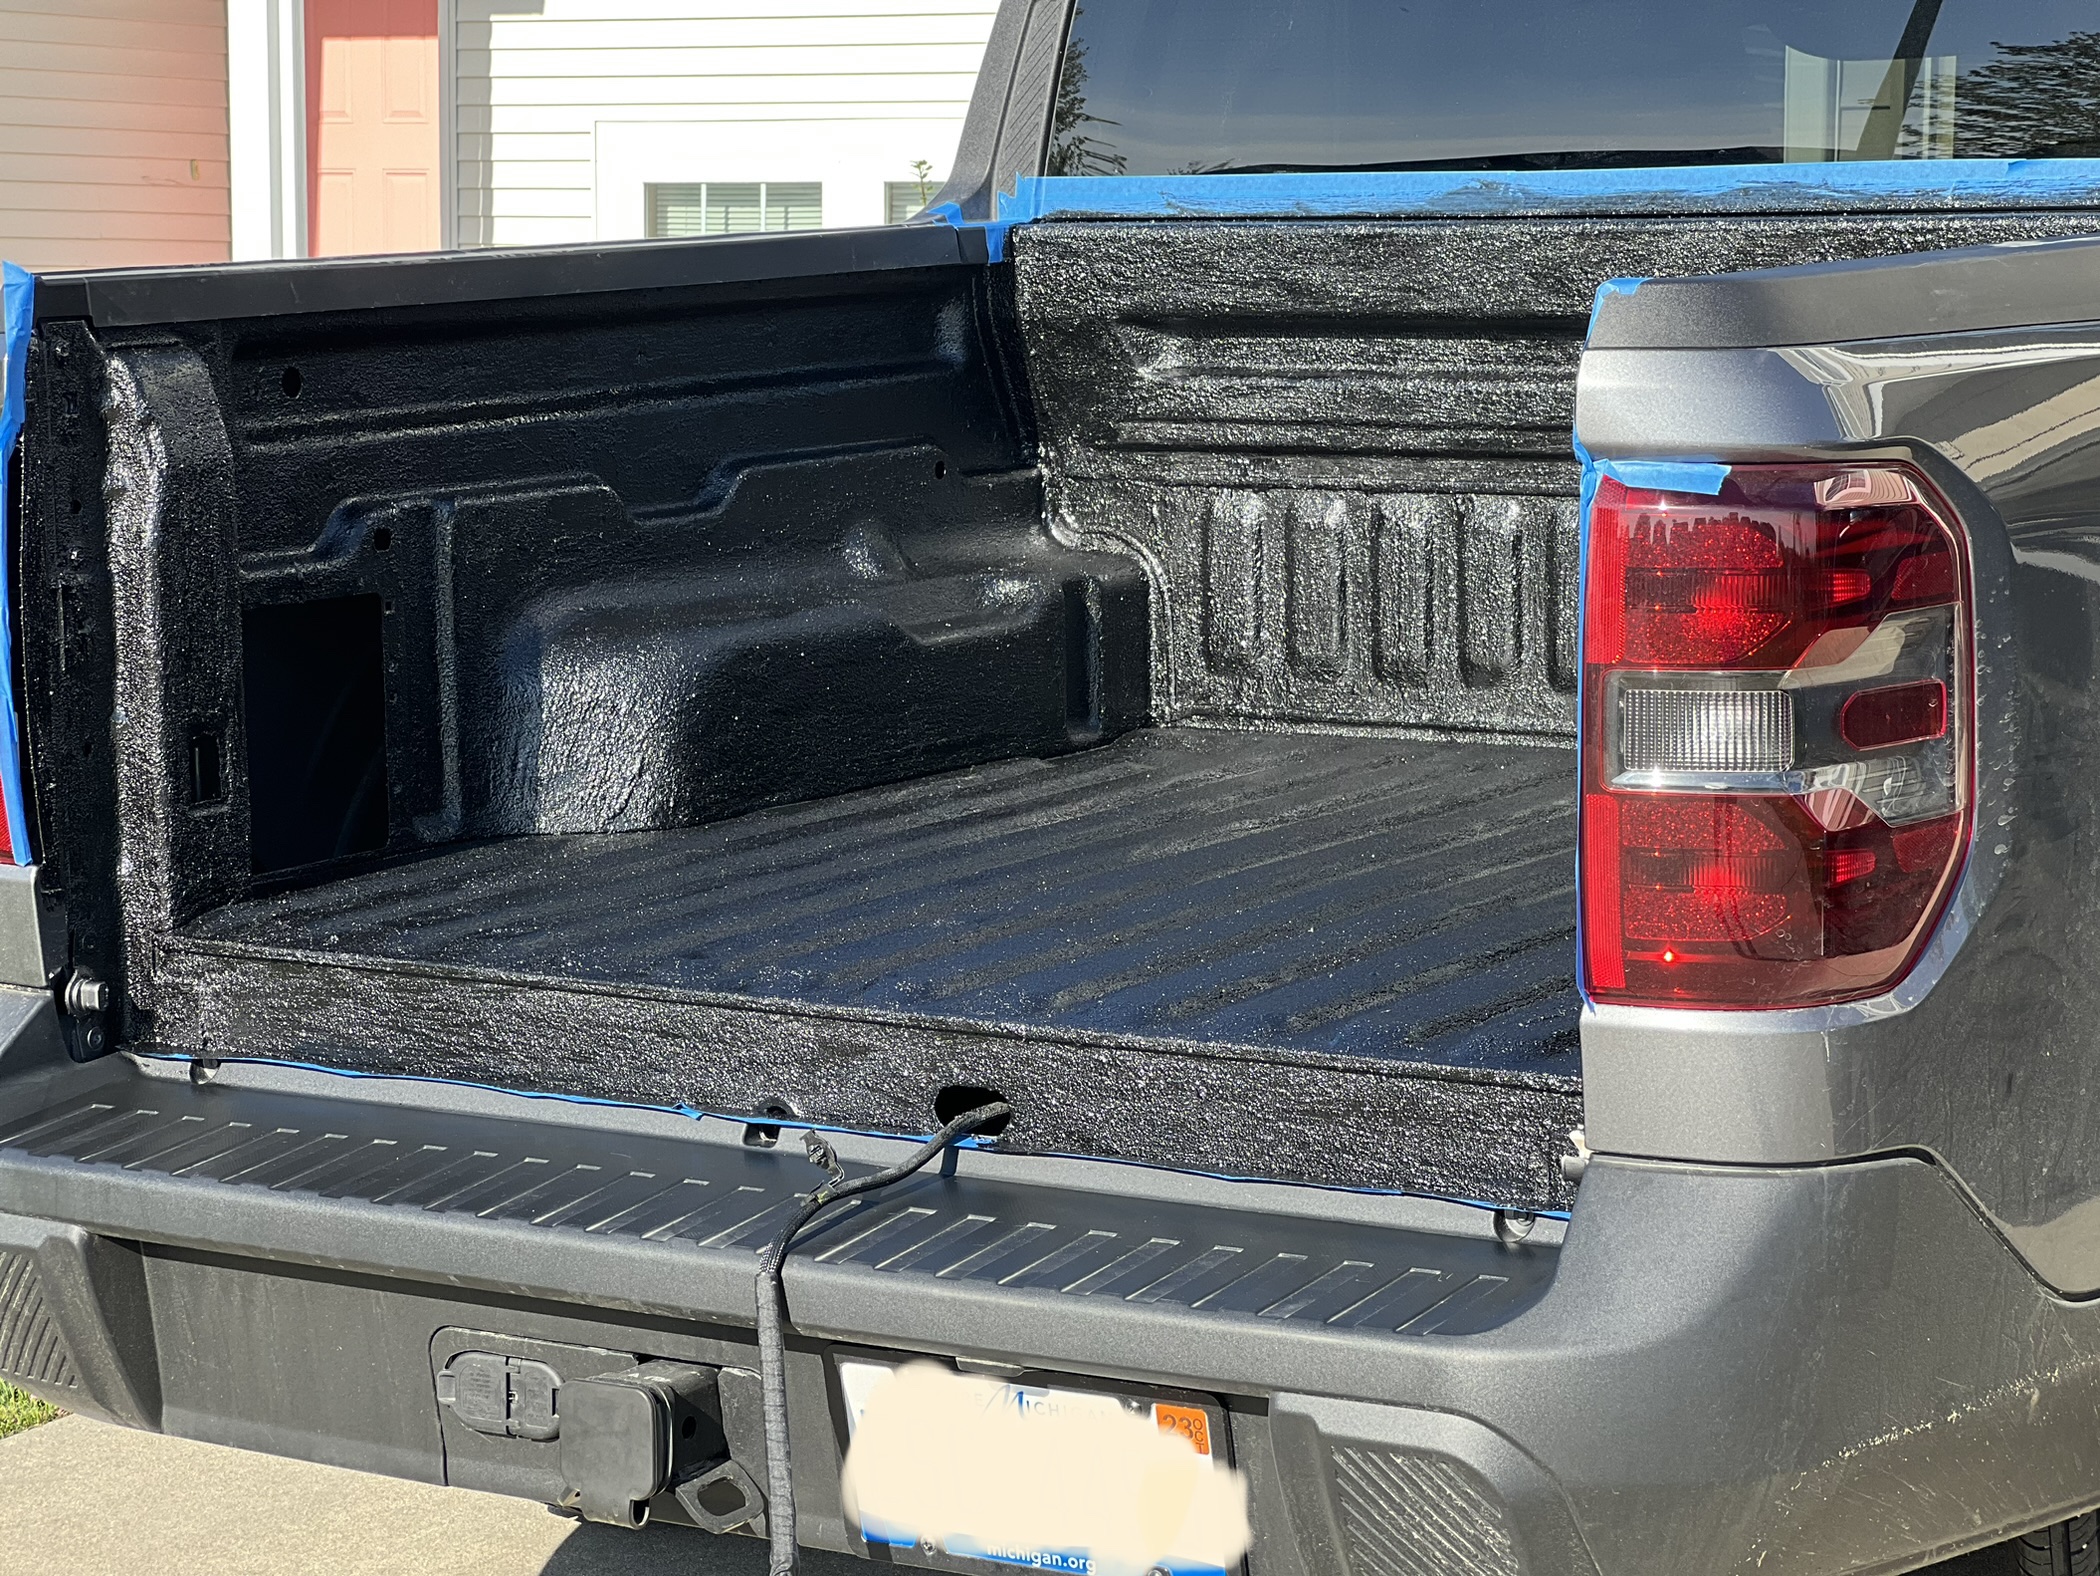 I did the DIY spray bedliner thing … in orange!  MaverickTruckClub - 2022+  Ford Maverick Pickup Forum, News, Owners, Discussions